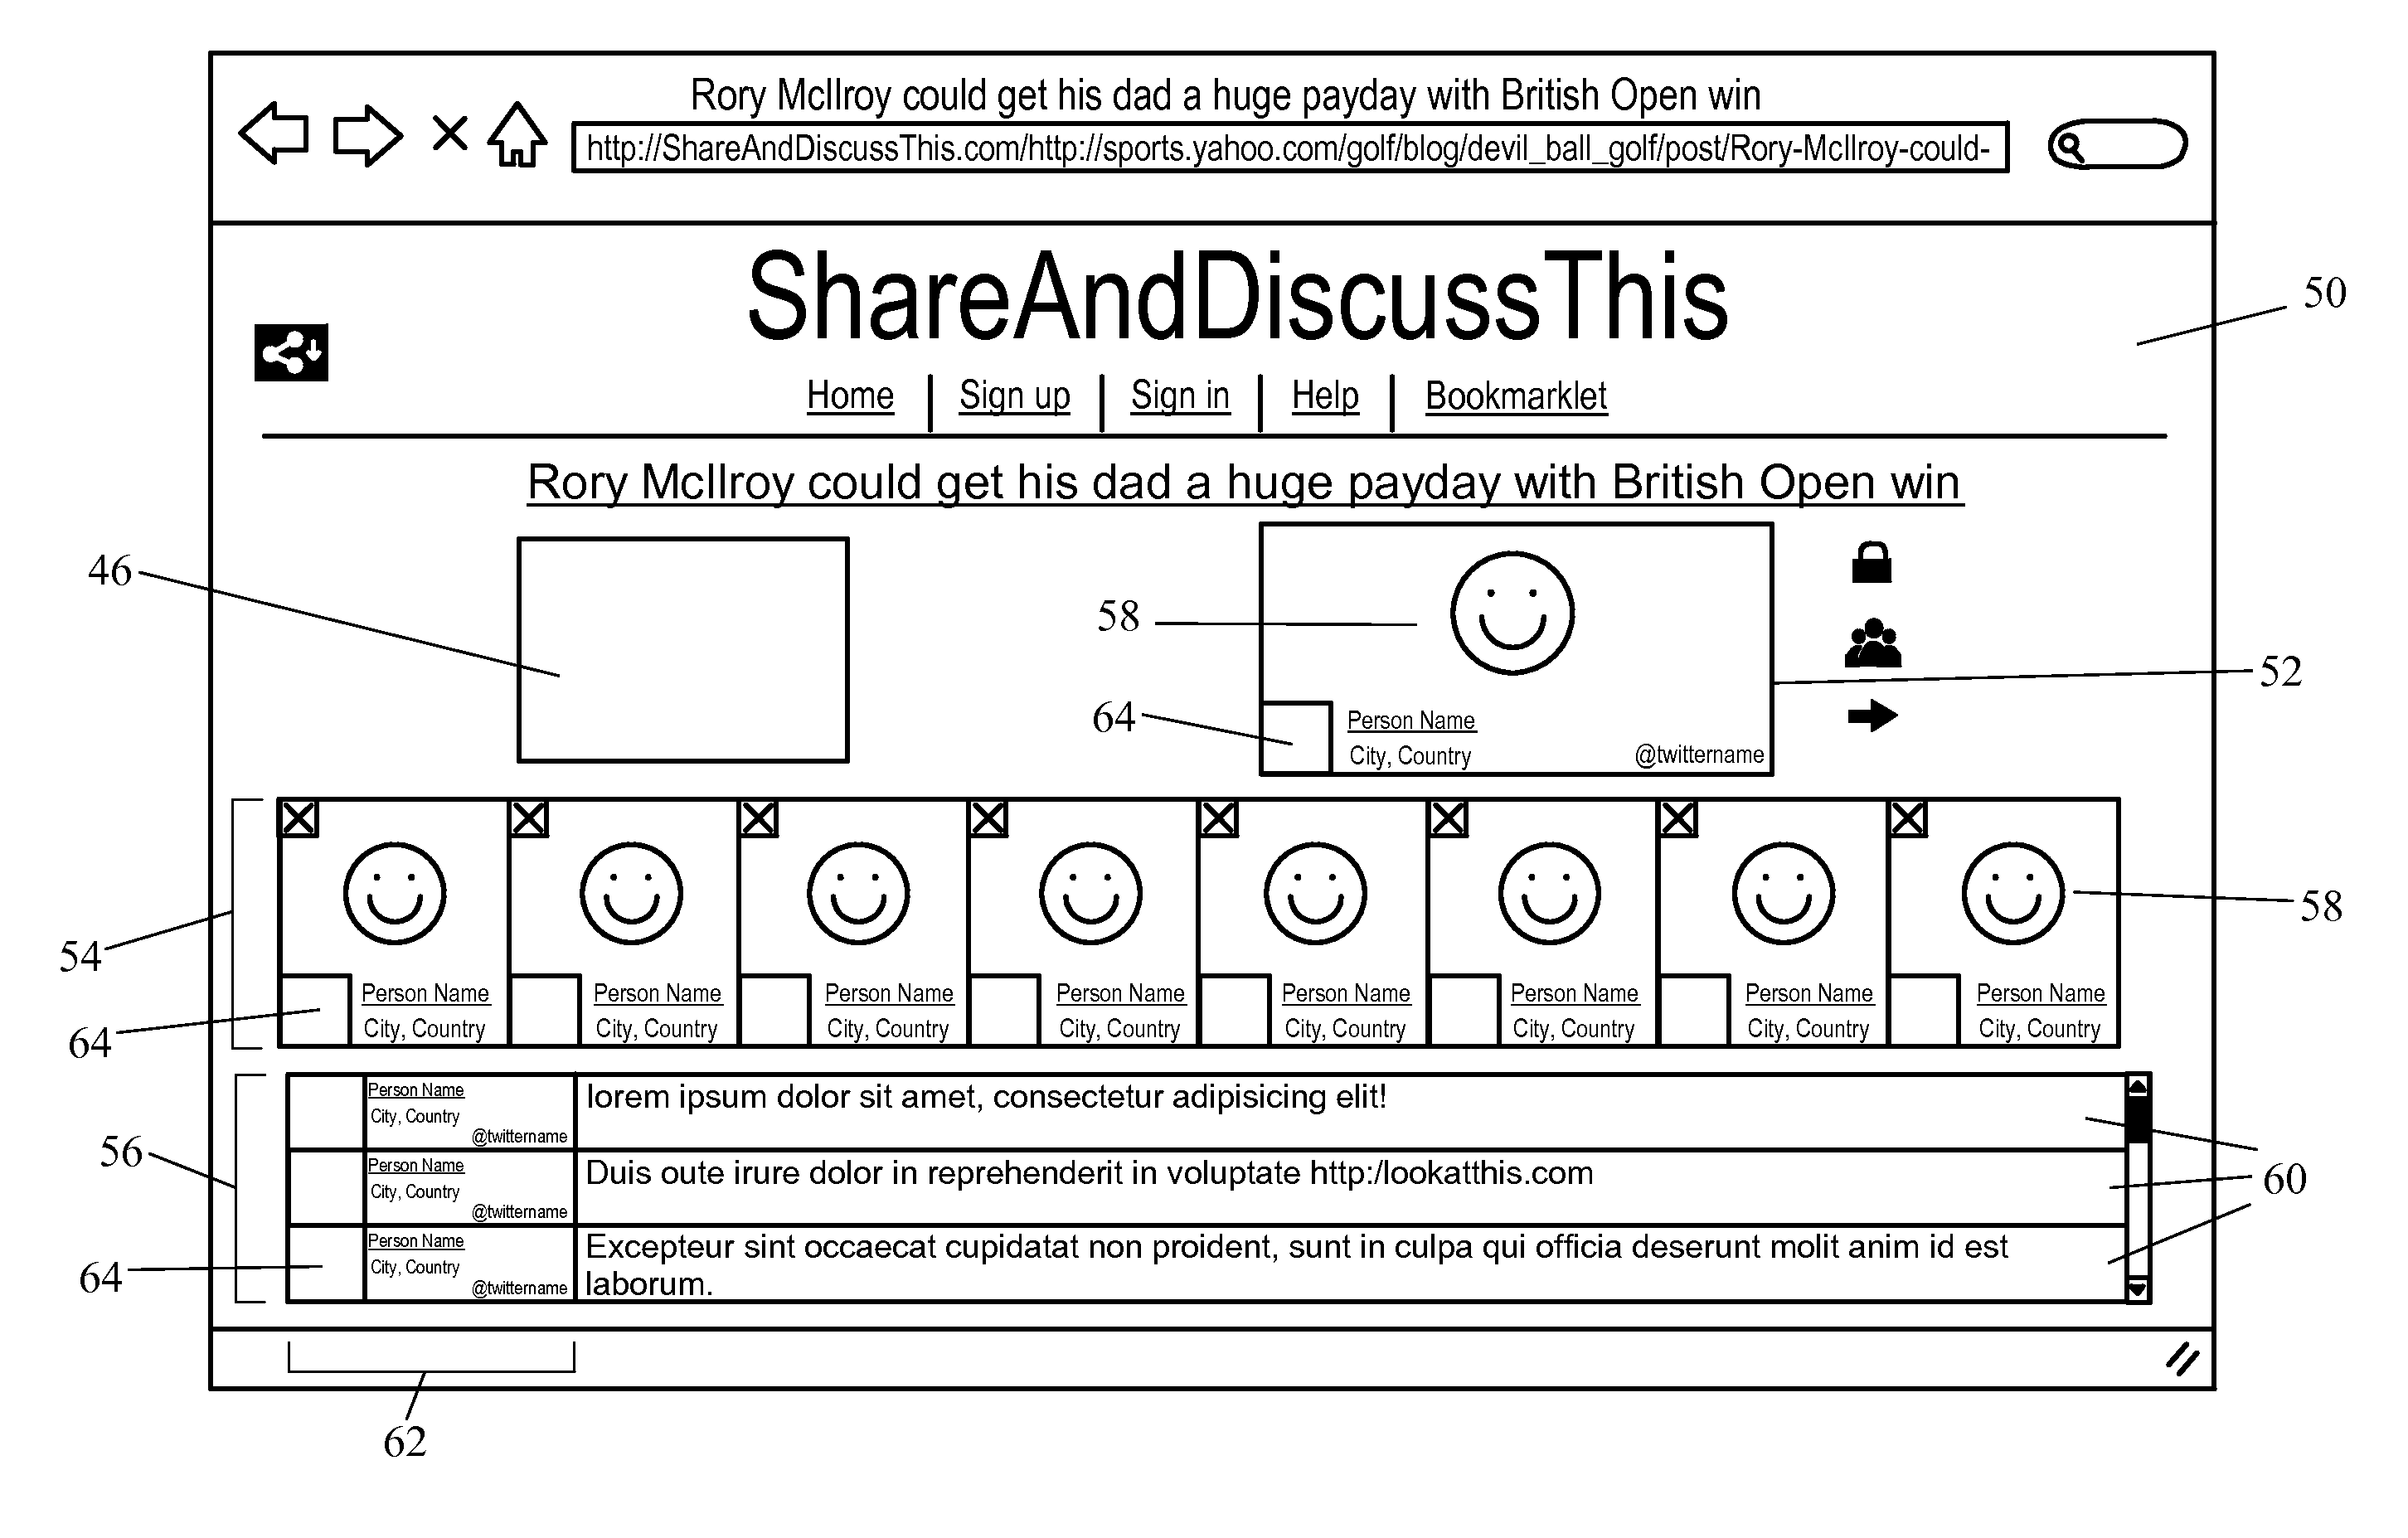 Methods of Sharing a Uniform Resource Locator (URL), and a URL Sharing Utility and Social Network Facilitating Group Chat about Shared Links